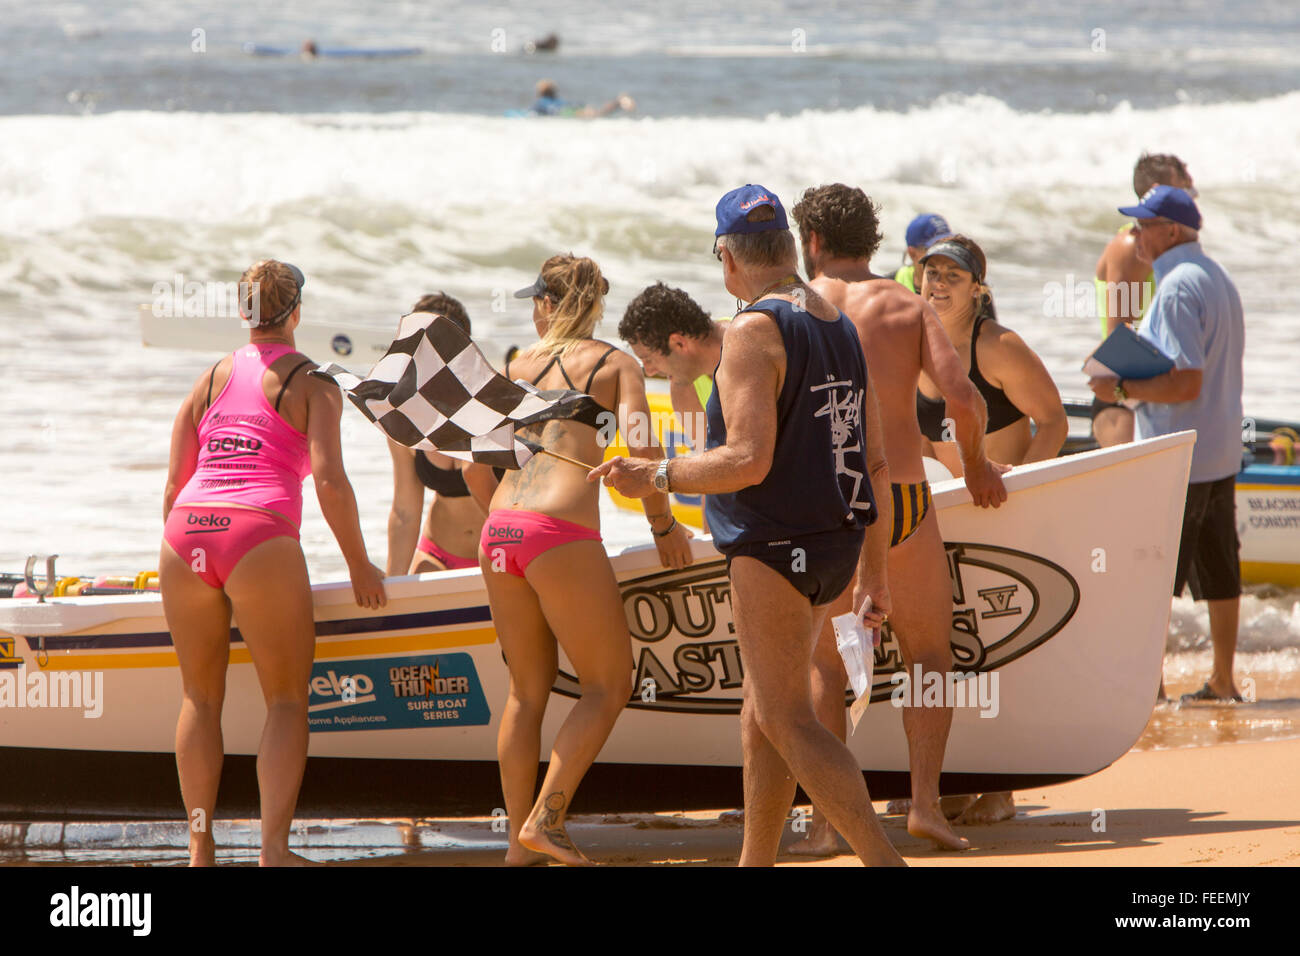 Sydney, Australia. 6th February, 2016. Ocean Thunder a televised Professional Surf boat racing event held on Collaroy Beach,Sydney, featuring elite mens and womens surf boat series. Pictured womens ladies crew team prepare to launch their surfboat Stock Photo